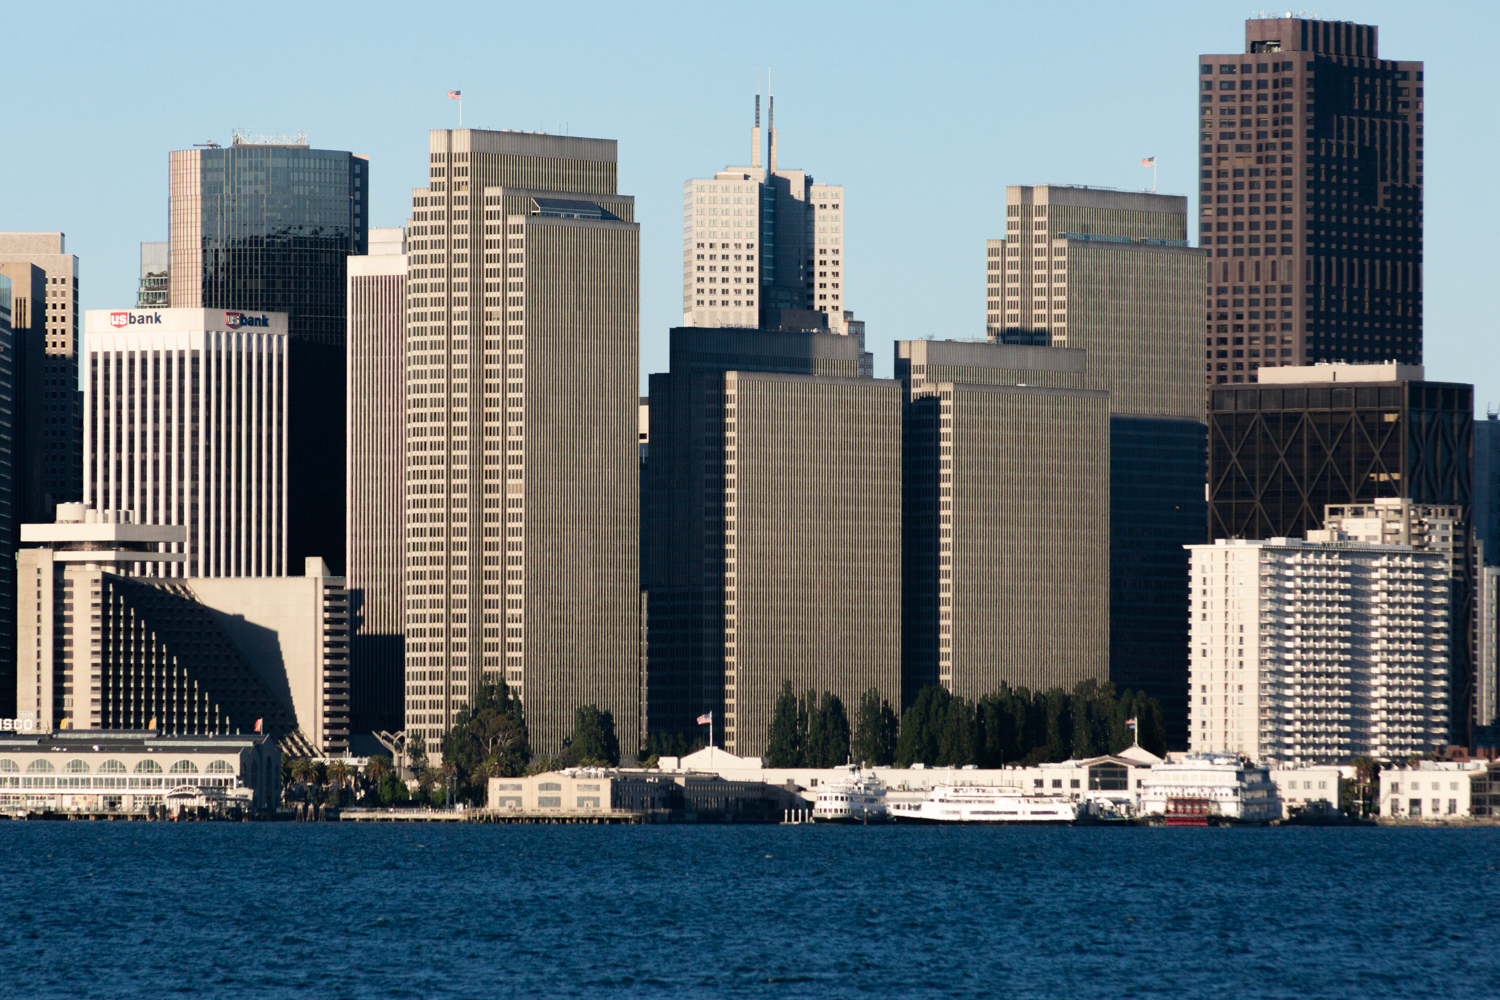 The Embarcadero Center viewed from Treasure Island, image by Andrew Campbell Nelson